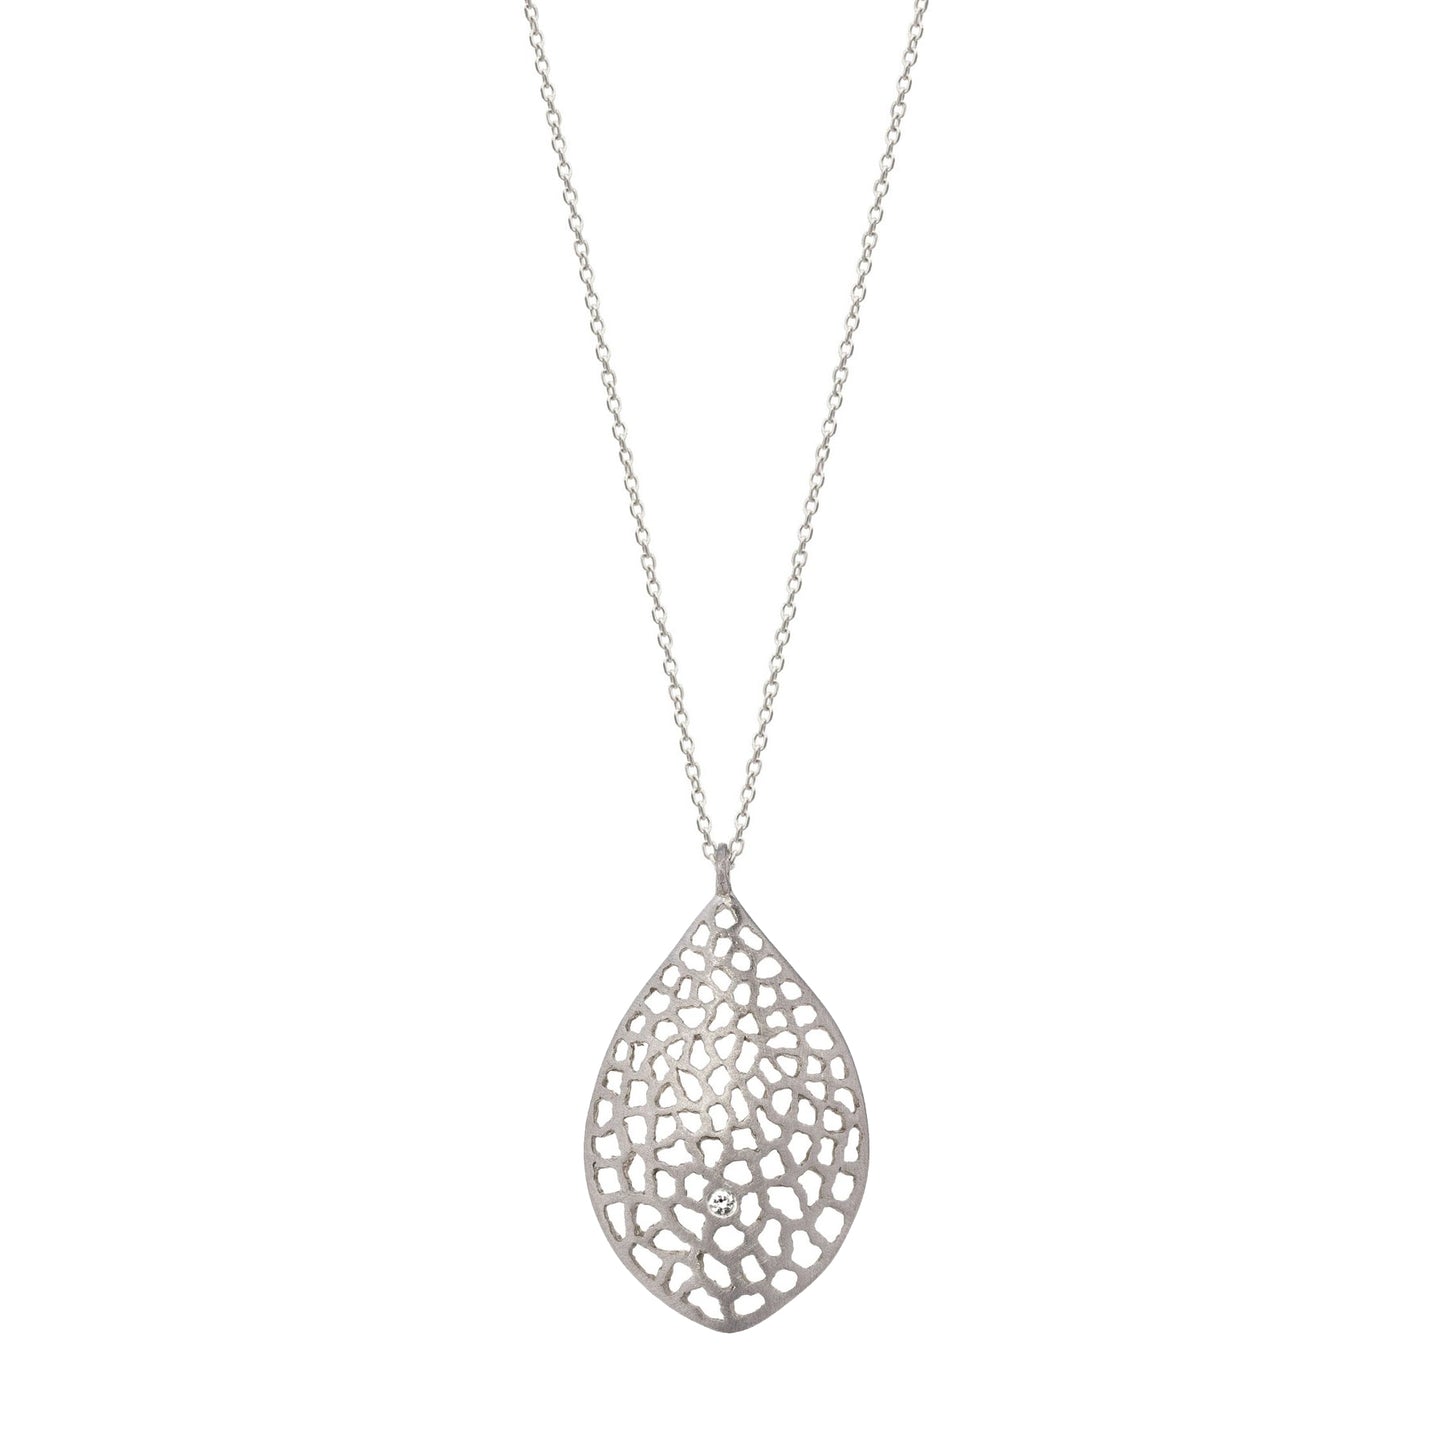 Lacy Leaf Sterling Silver Pendant Necklace with Diamond